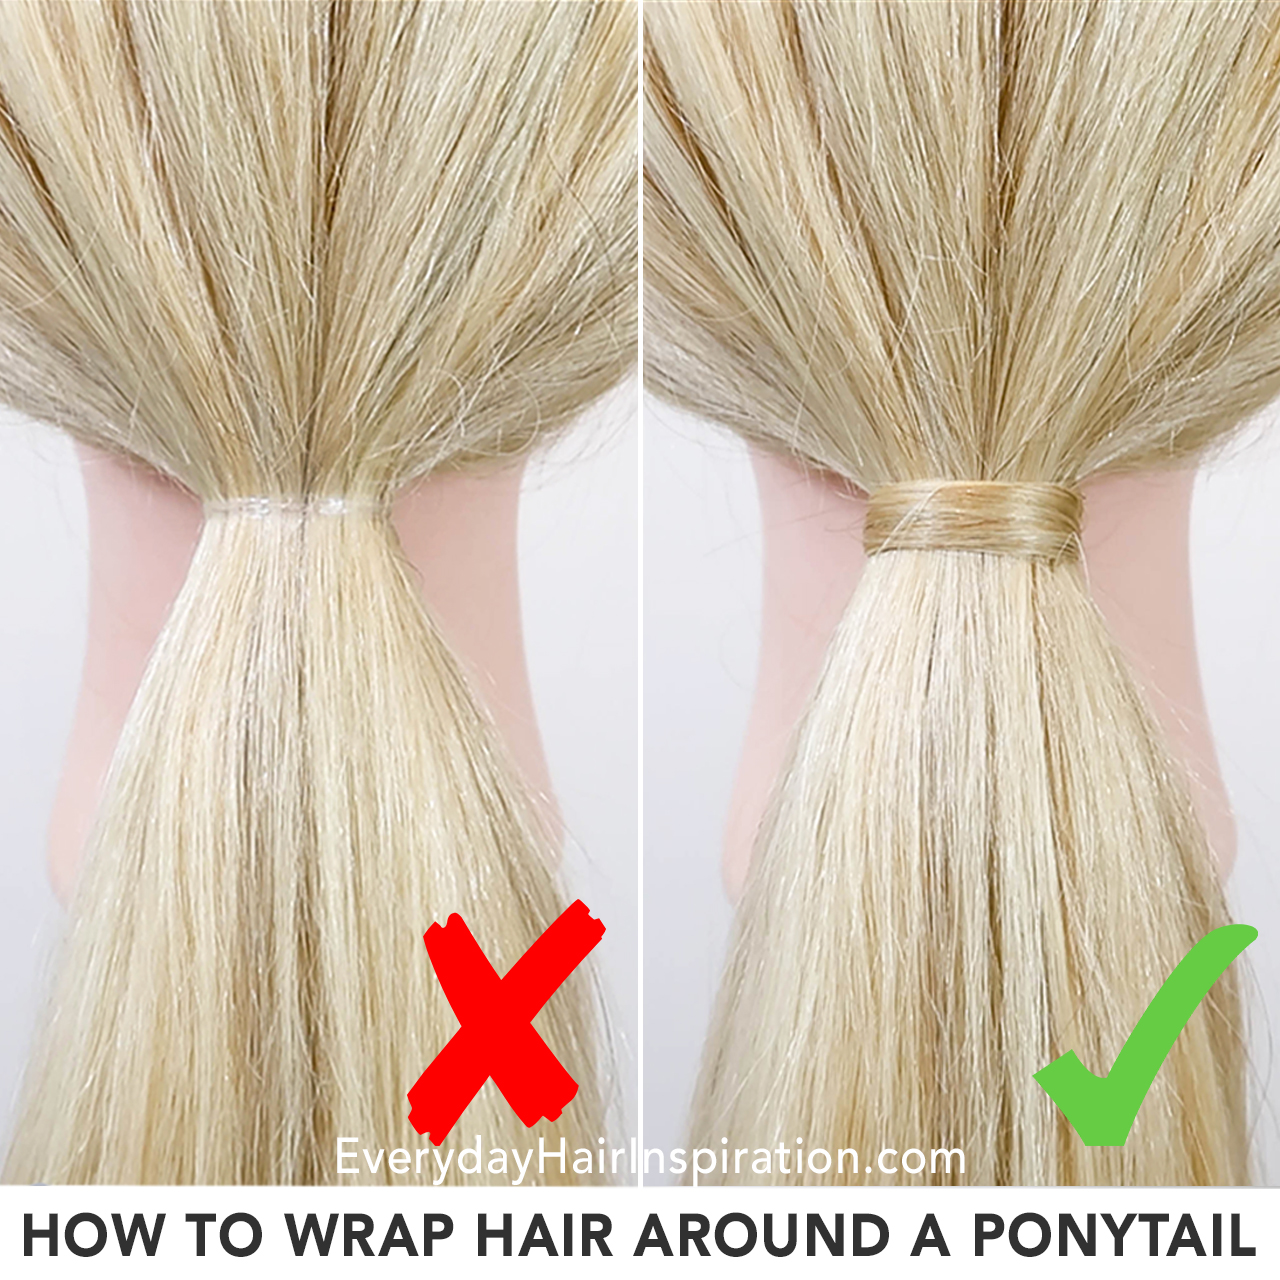 2 hairdresser dolls with ponytails, one has hair wrapped around the elastic to cover it. Text at the bottom of the picture "How to wrap hair around a ponytail".